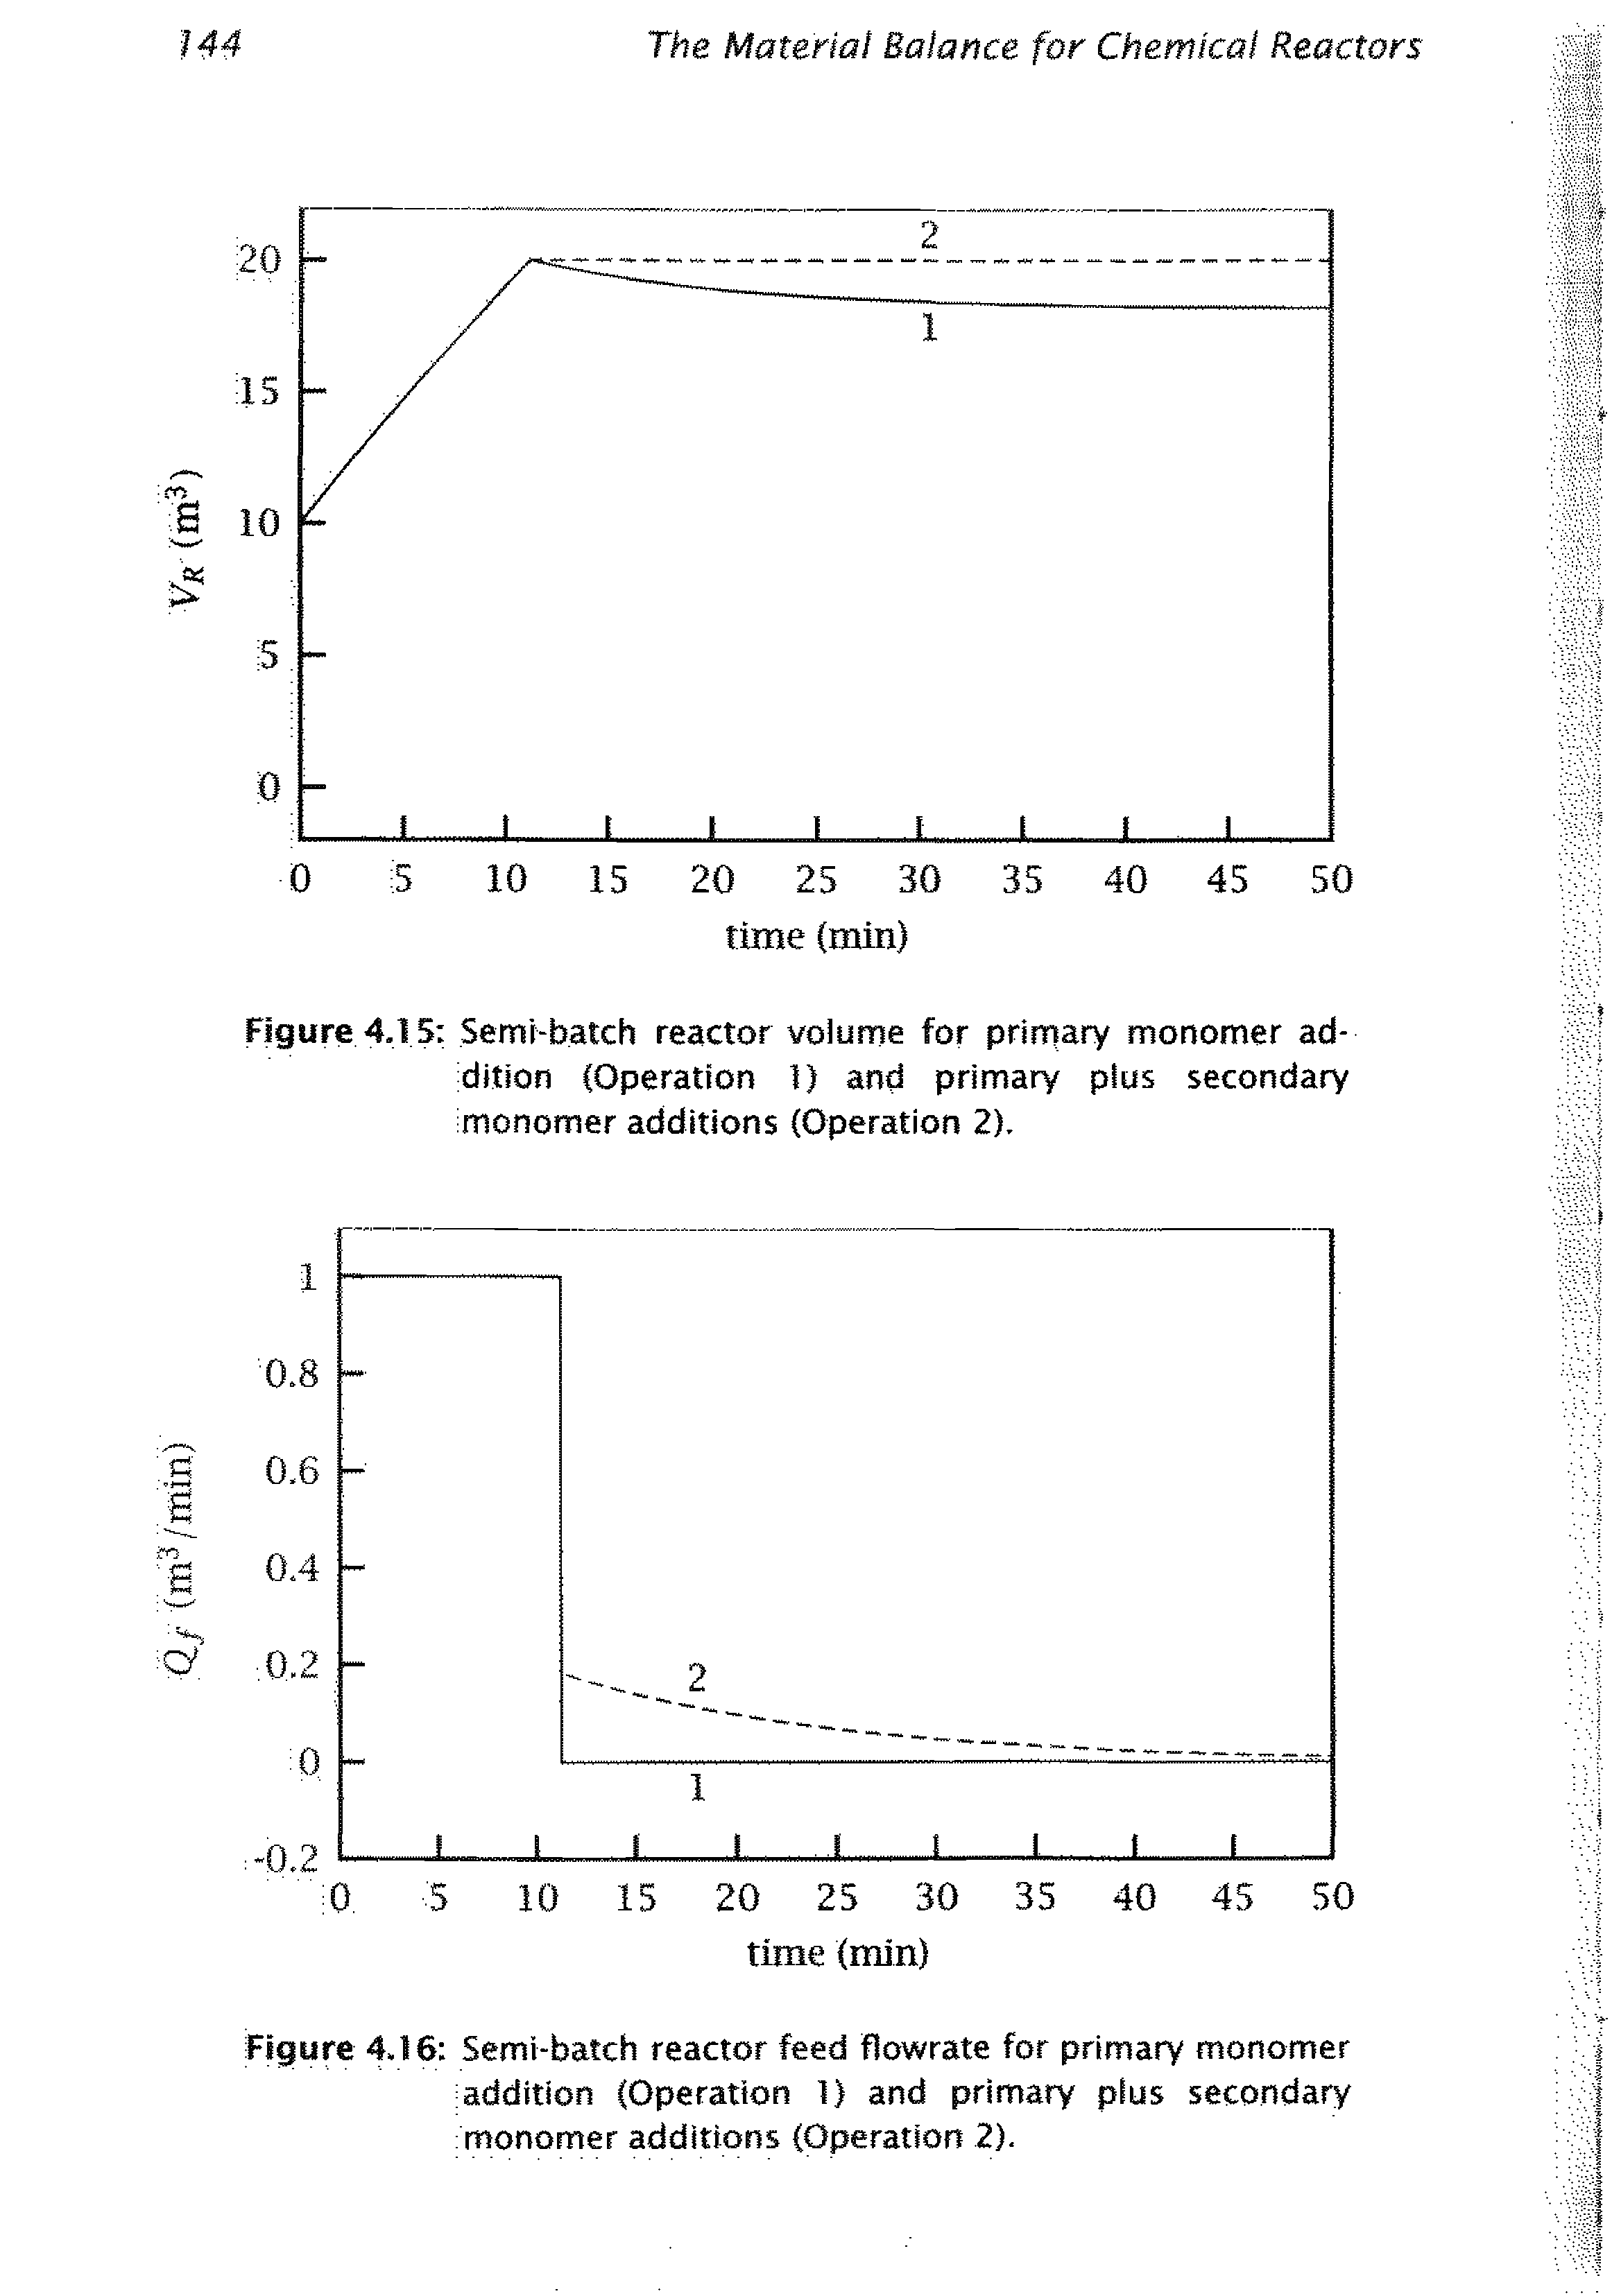 Figure 4.15 Semi-batch reactor volume for prirnary monomer ad-idition (Operation 1) and primary plus secondary imonomer additions (Operation 2).